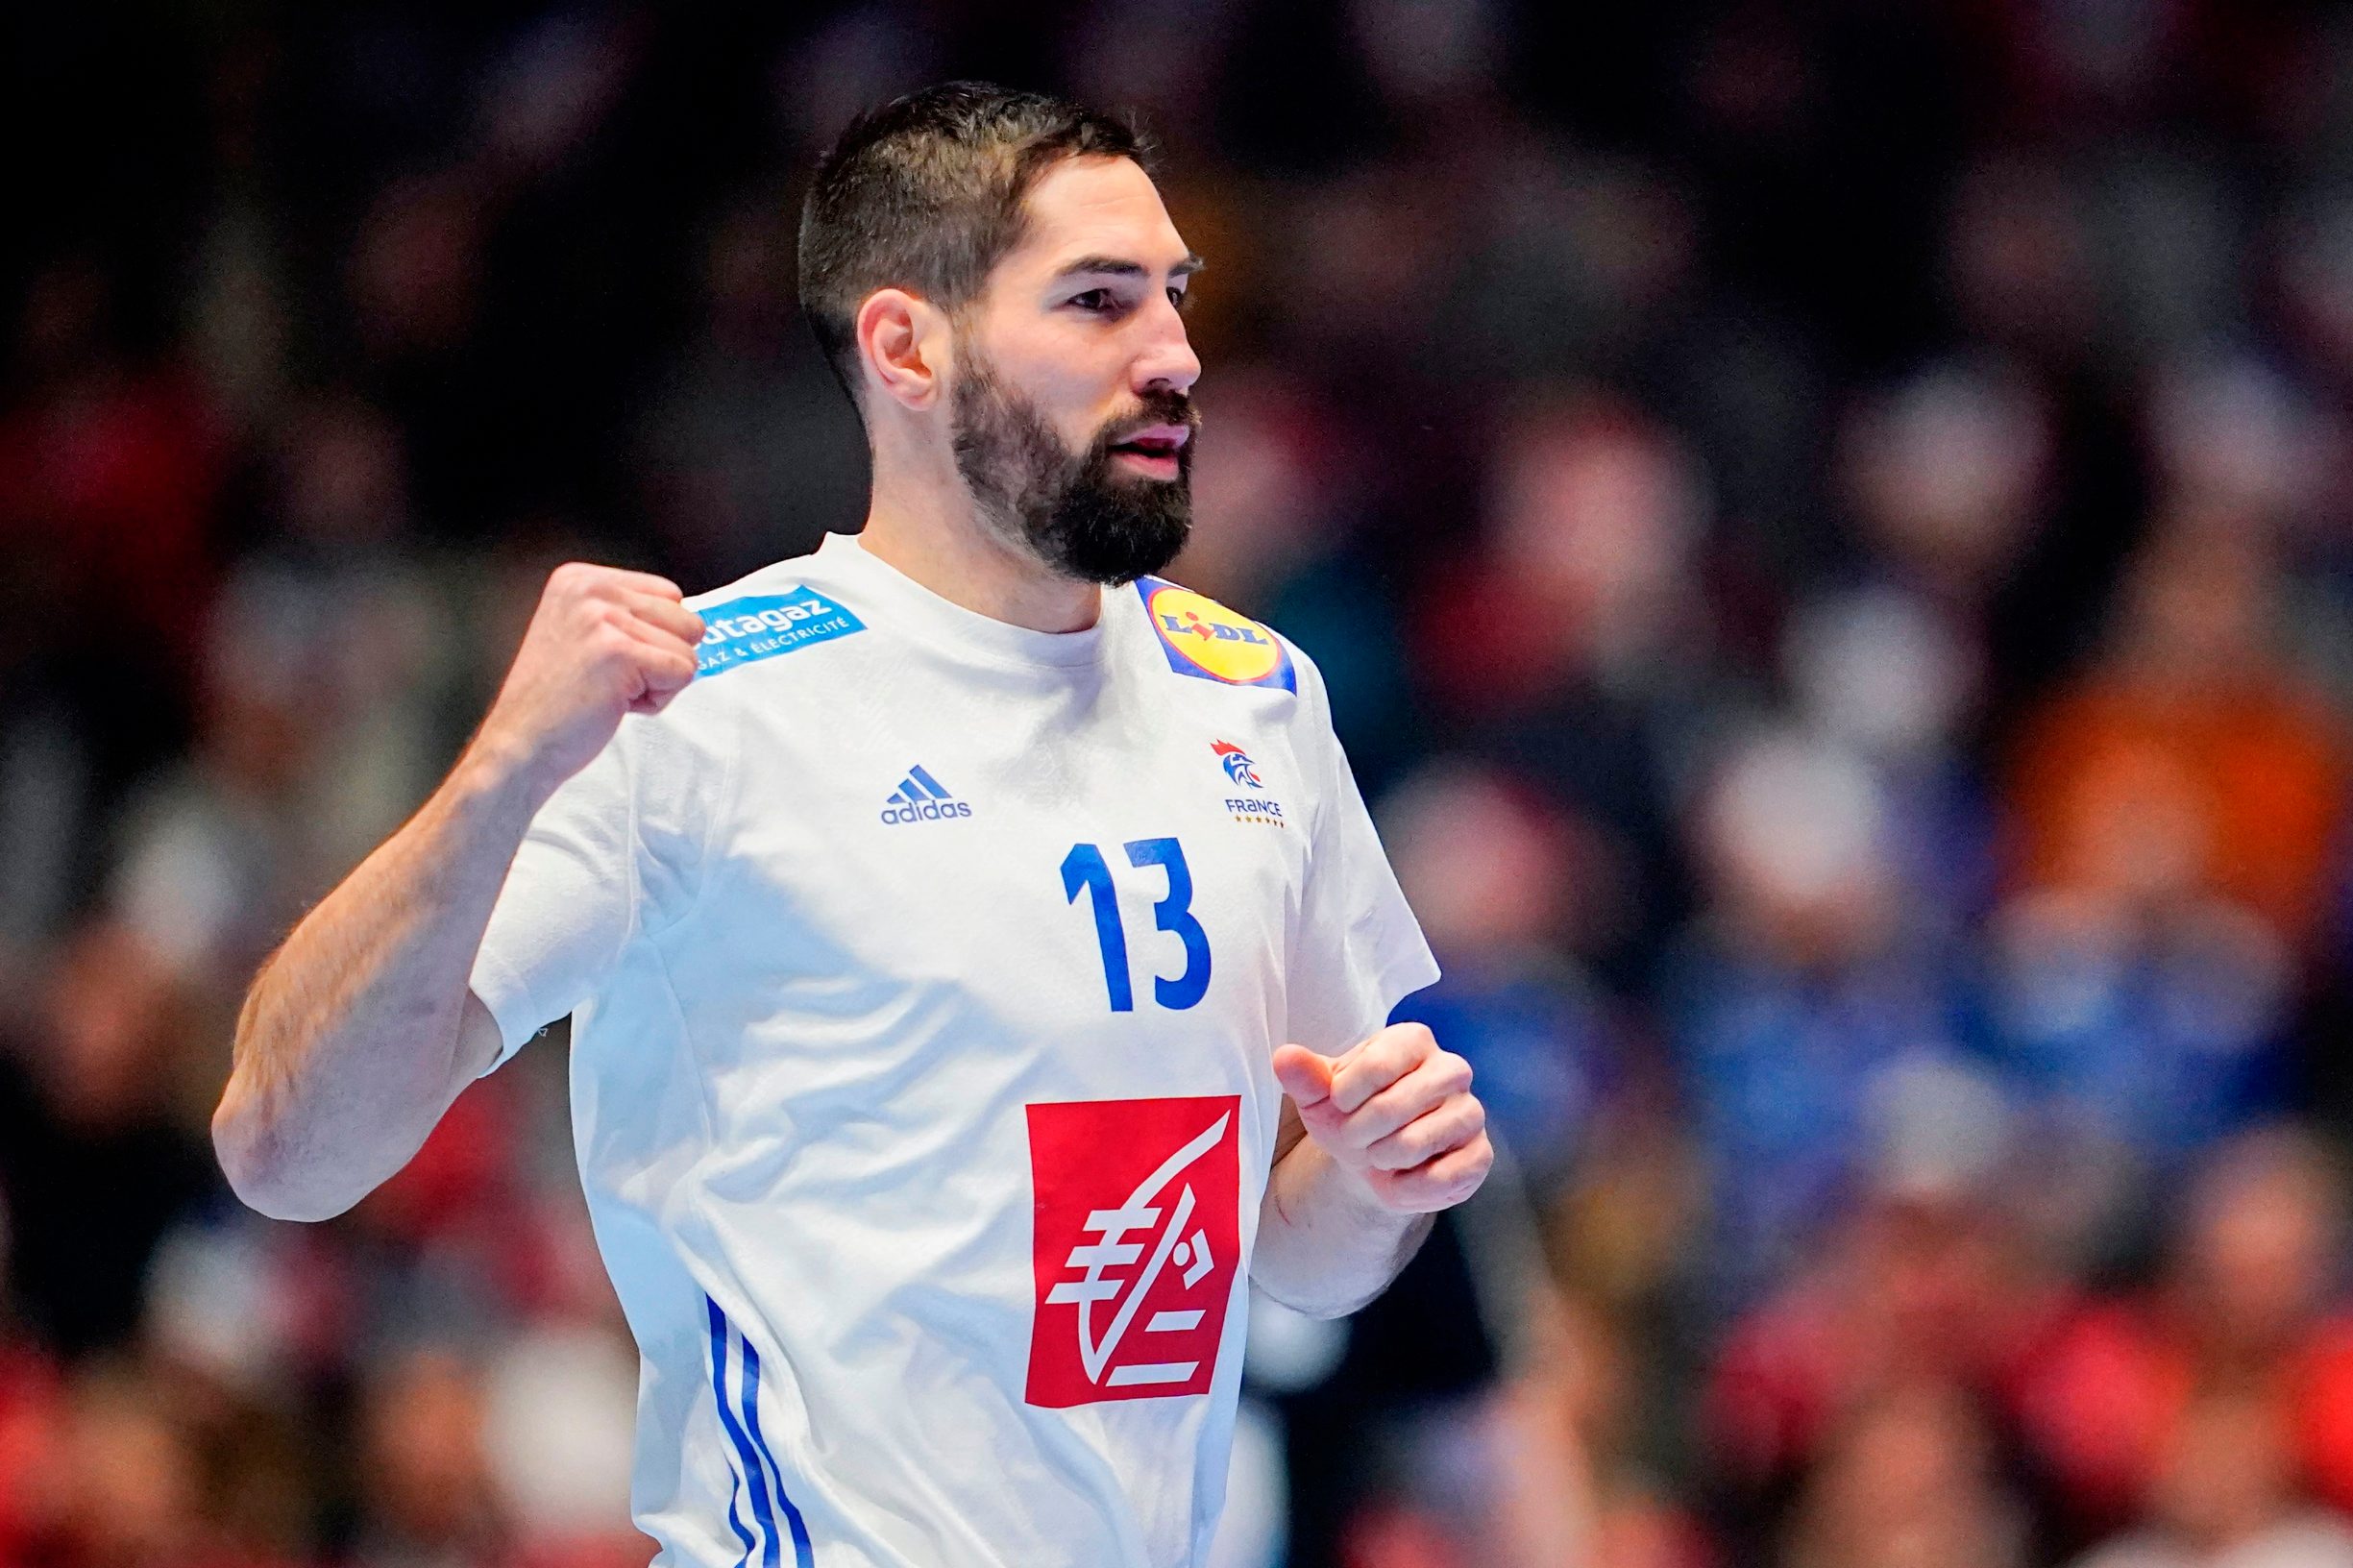 France's Nikola Karabatic reacts during the men's Handball European Championship match between Bosnia Herzegovina and France in Trondheim, Norway On January 14, 2020. (Photo by Ole Martin Wold / NTB Scanpix / AFP) / Norway OUT